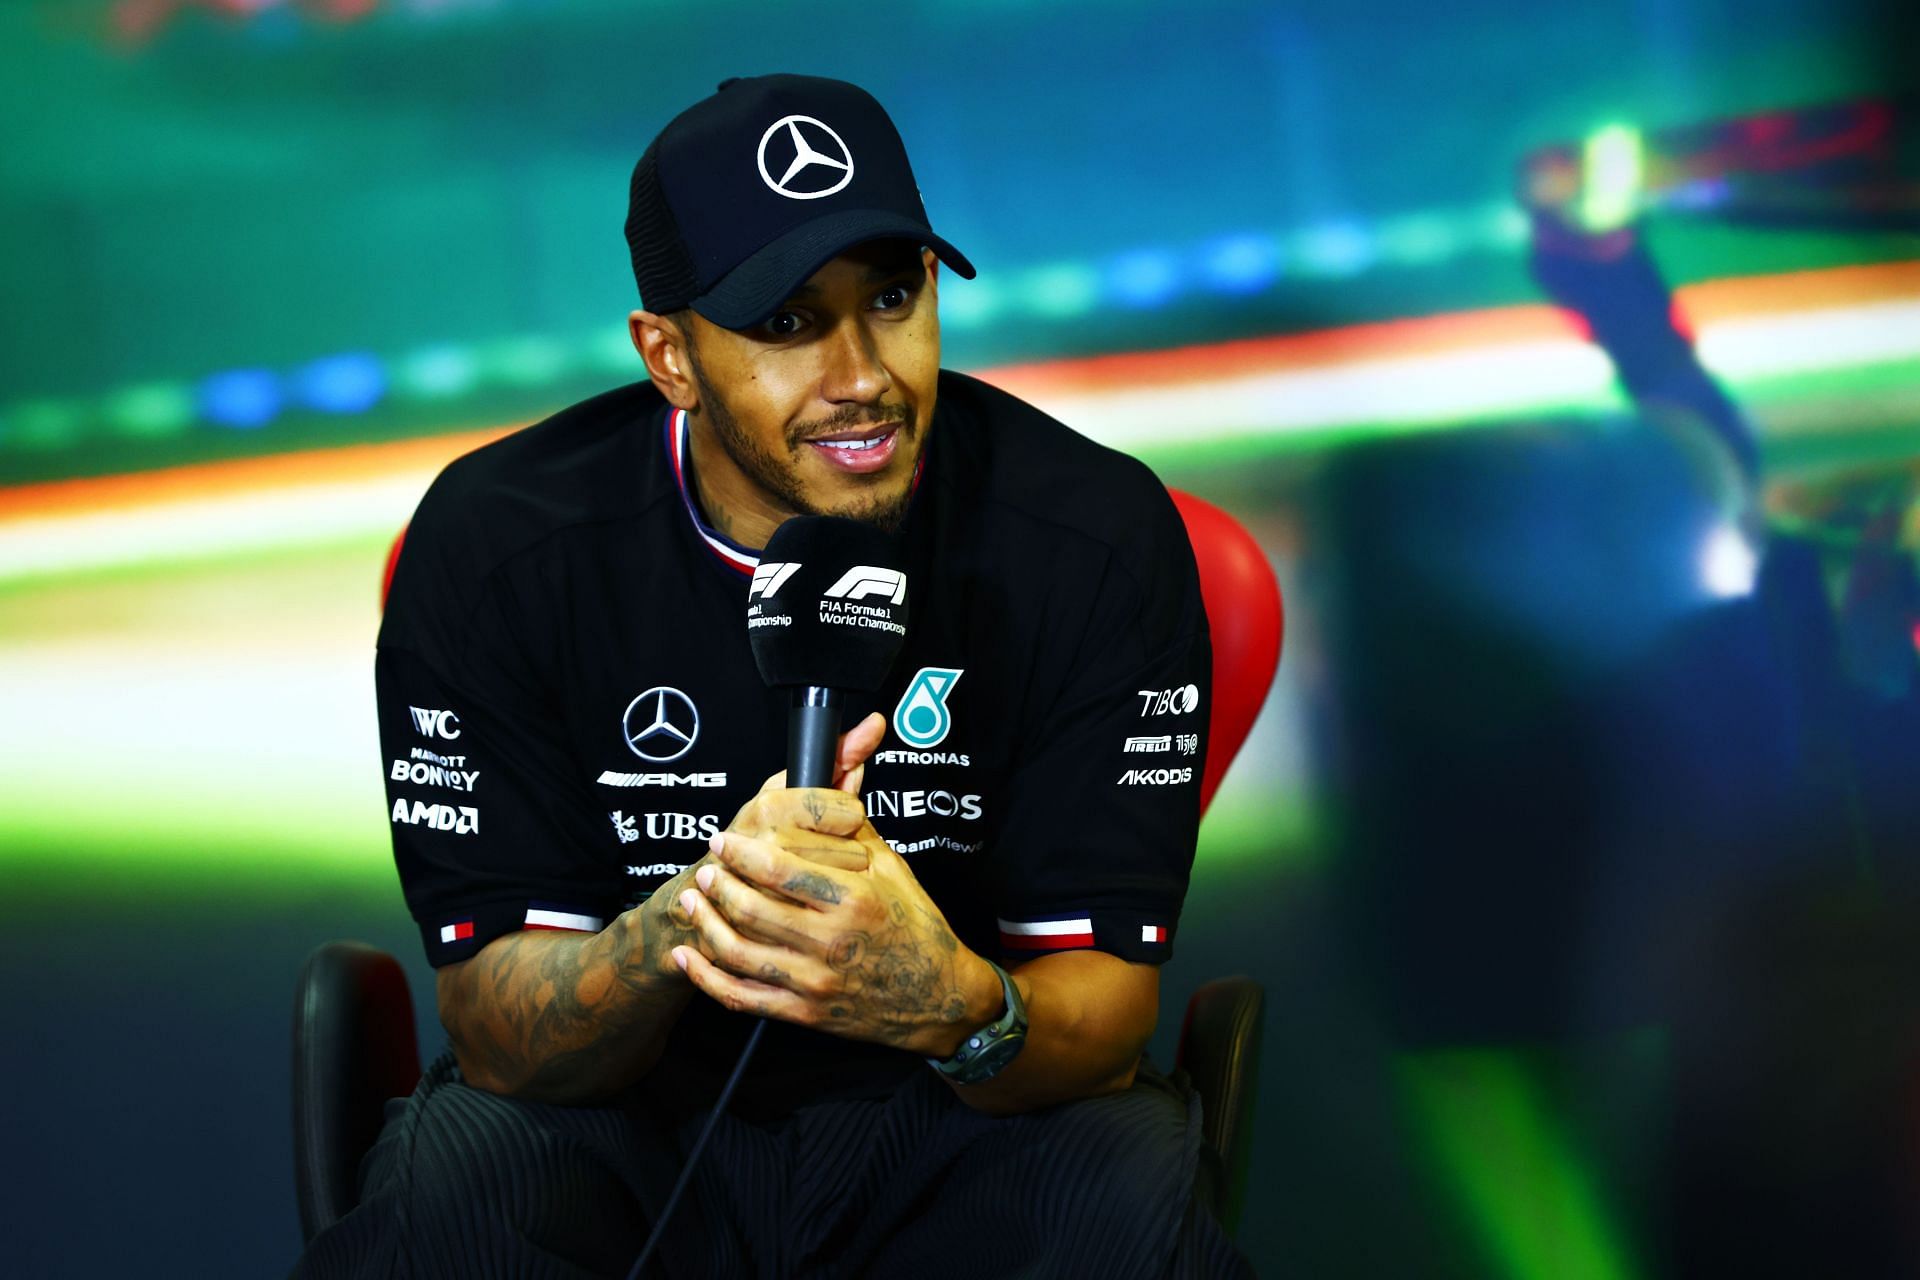 F1 Receives Backlash For Airing Lewis Hamilton 8-Time World Champion Shirt  - F1 Briefings: Formula 1 News, Rumors, Standings and More